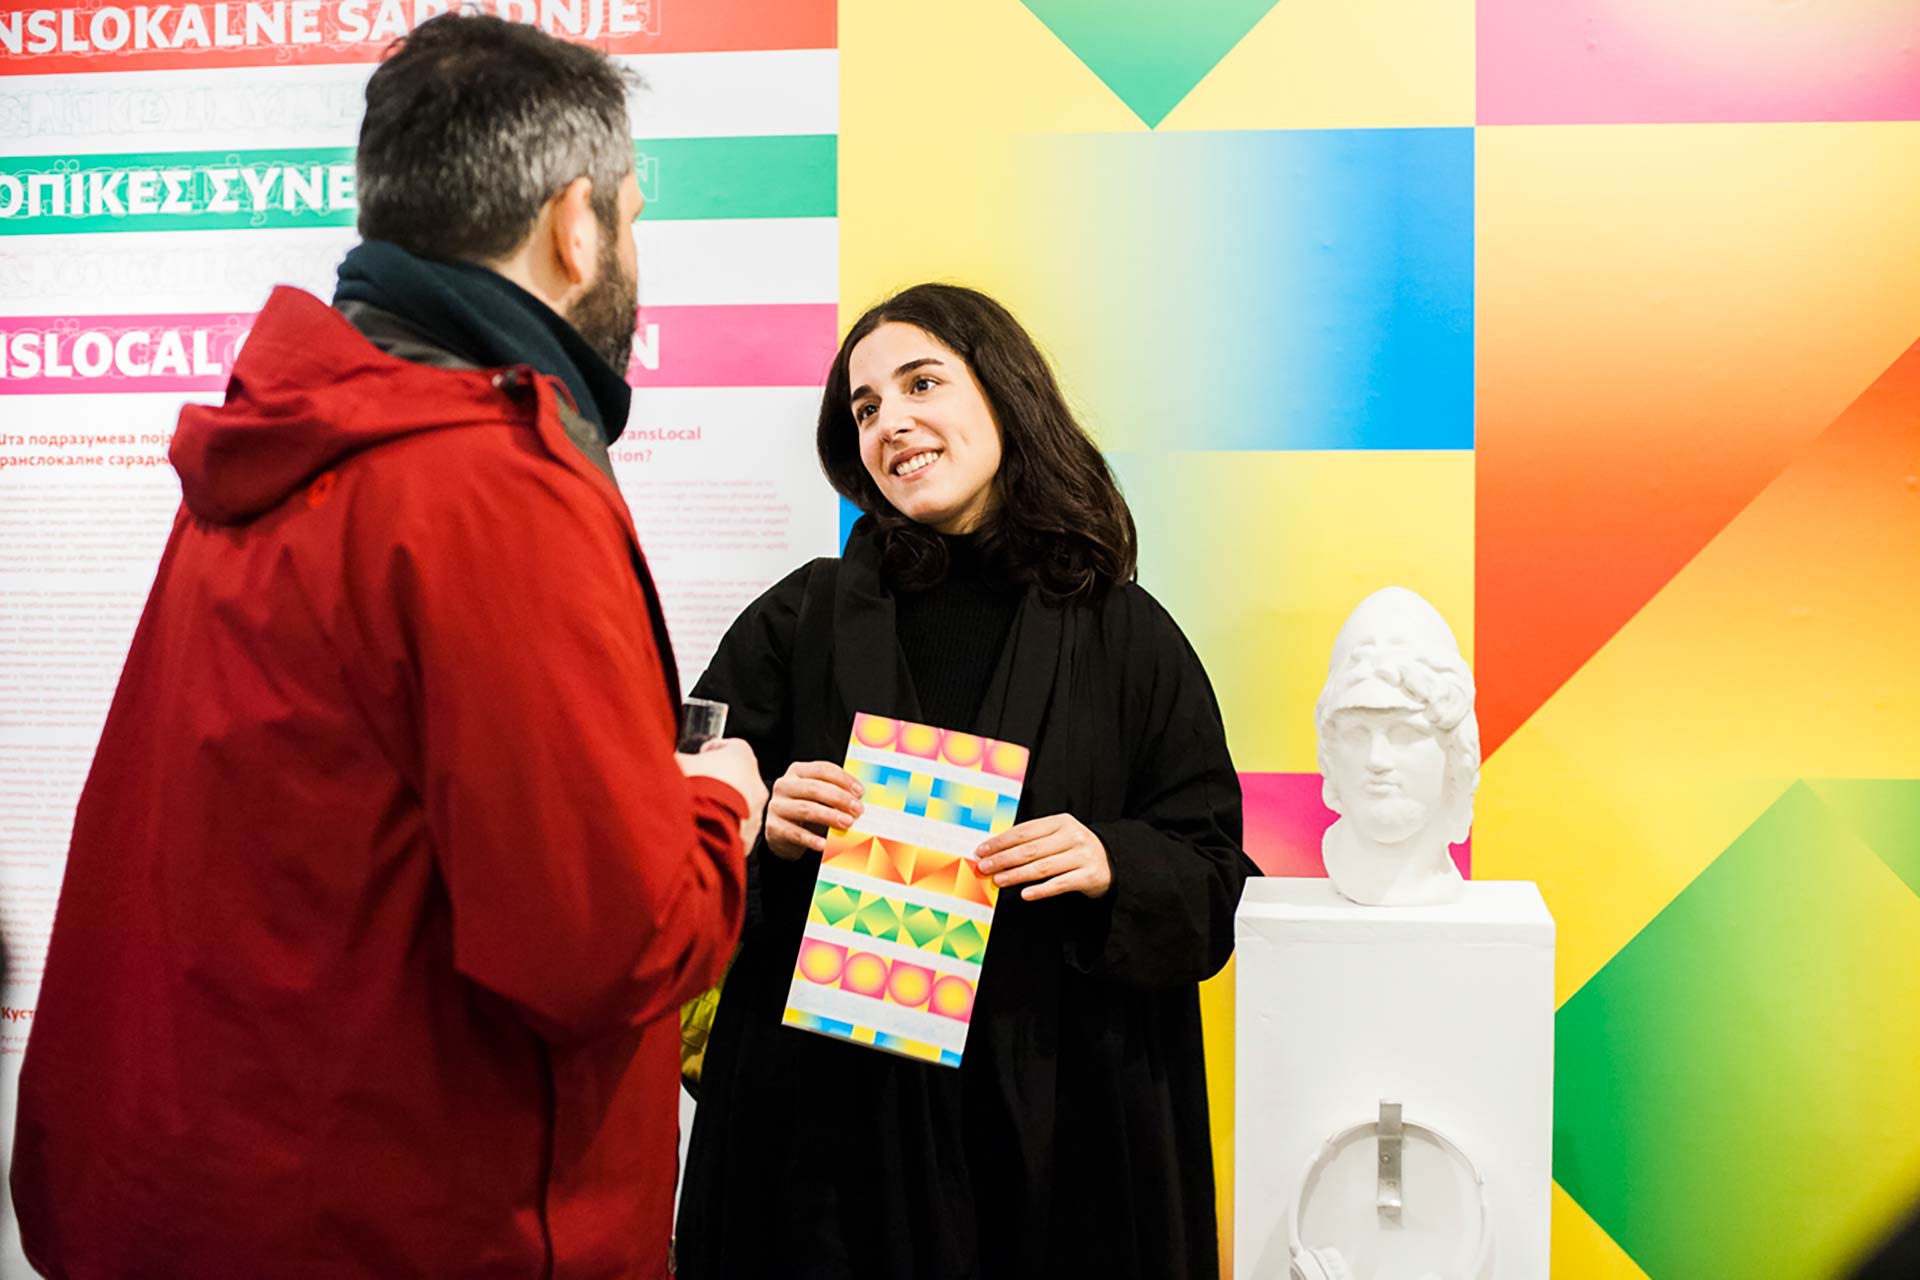 An image of one of the artists exhibiting within the Furtherfield Gallery space, in her hand is a Translocal Cooperation booklet. On the wall behind the artist has large geometric colourful shapes which are used throughout the Visual Identity.